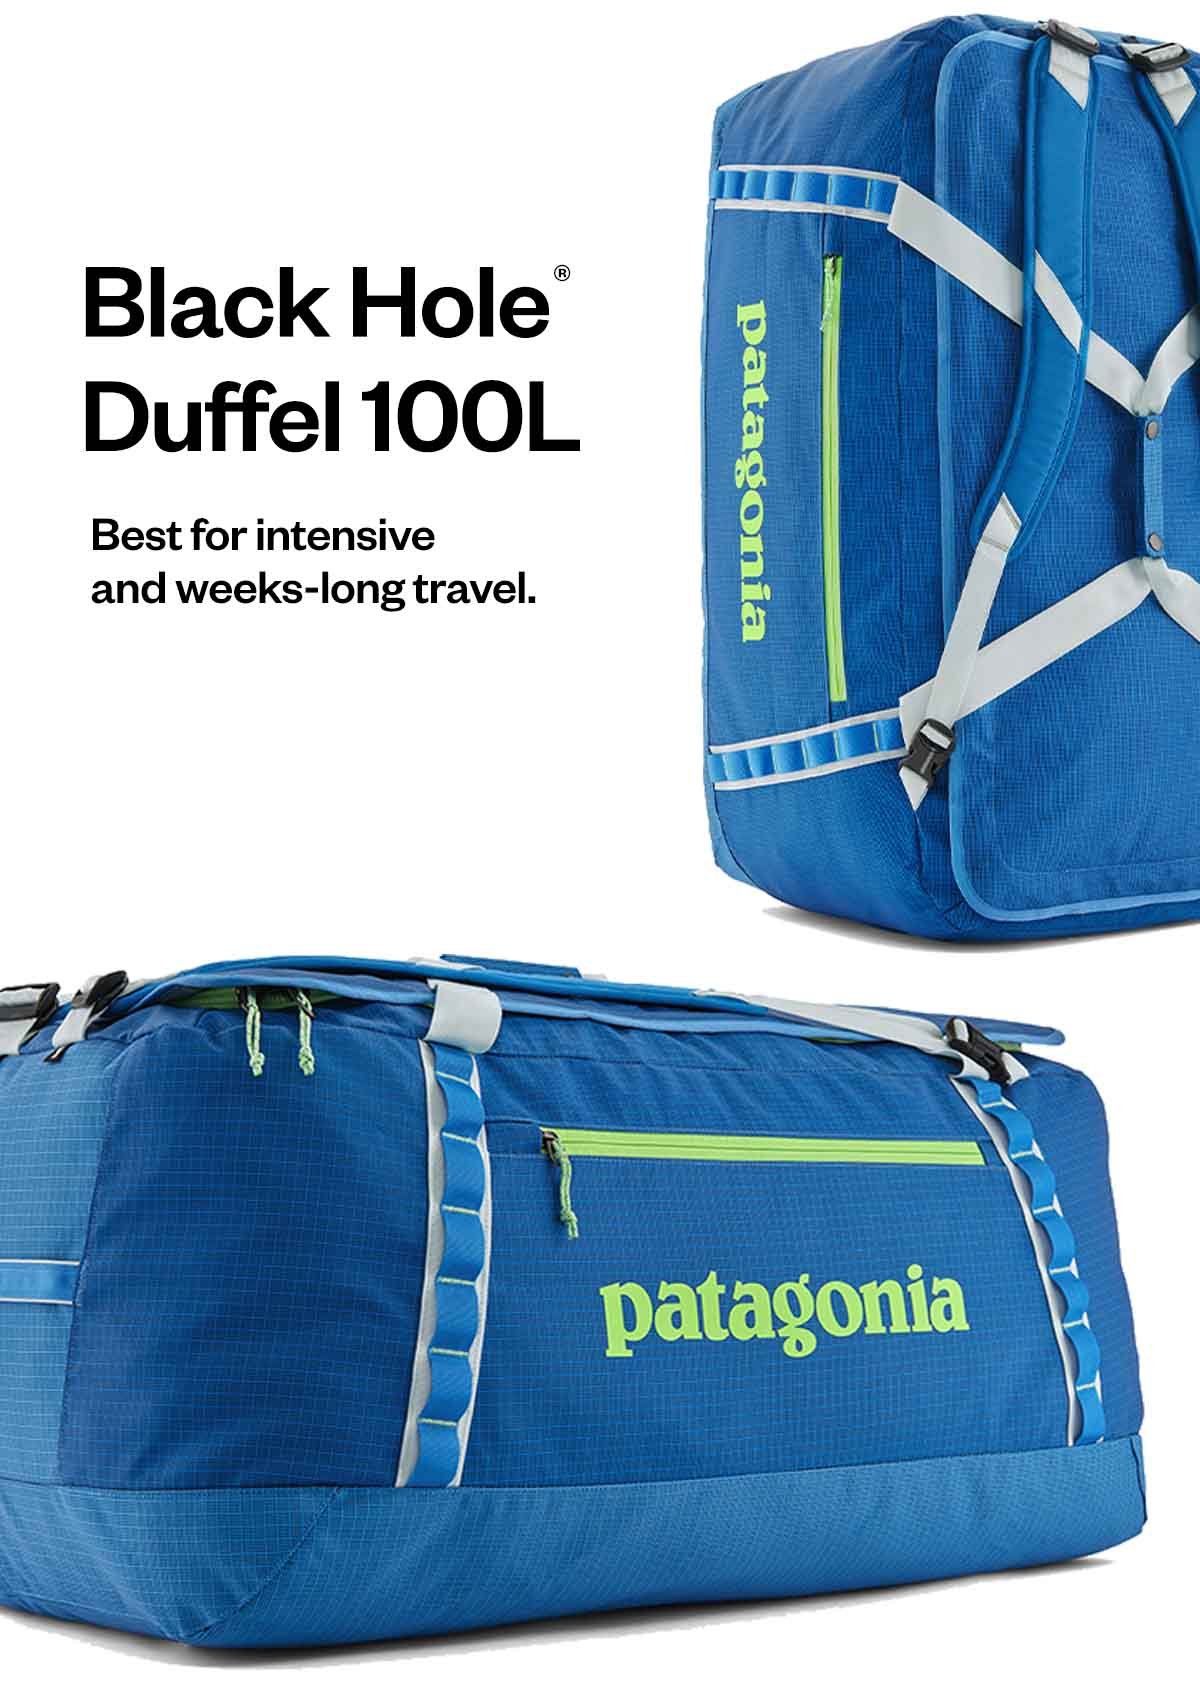 Black Hole® Duffel 100 liter. Best for intensive and weeks-long travel.